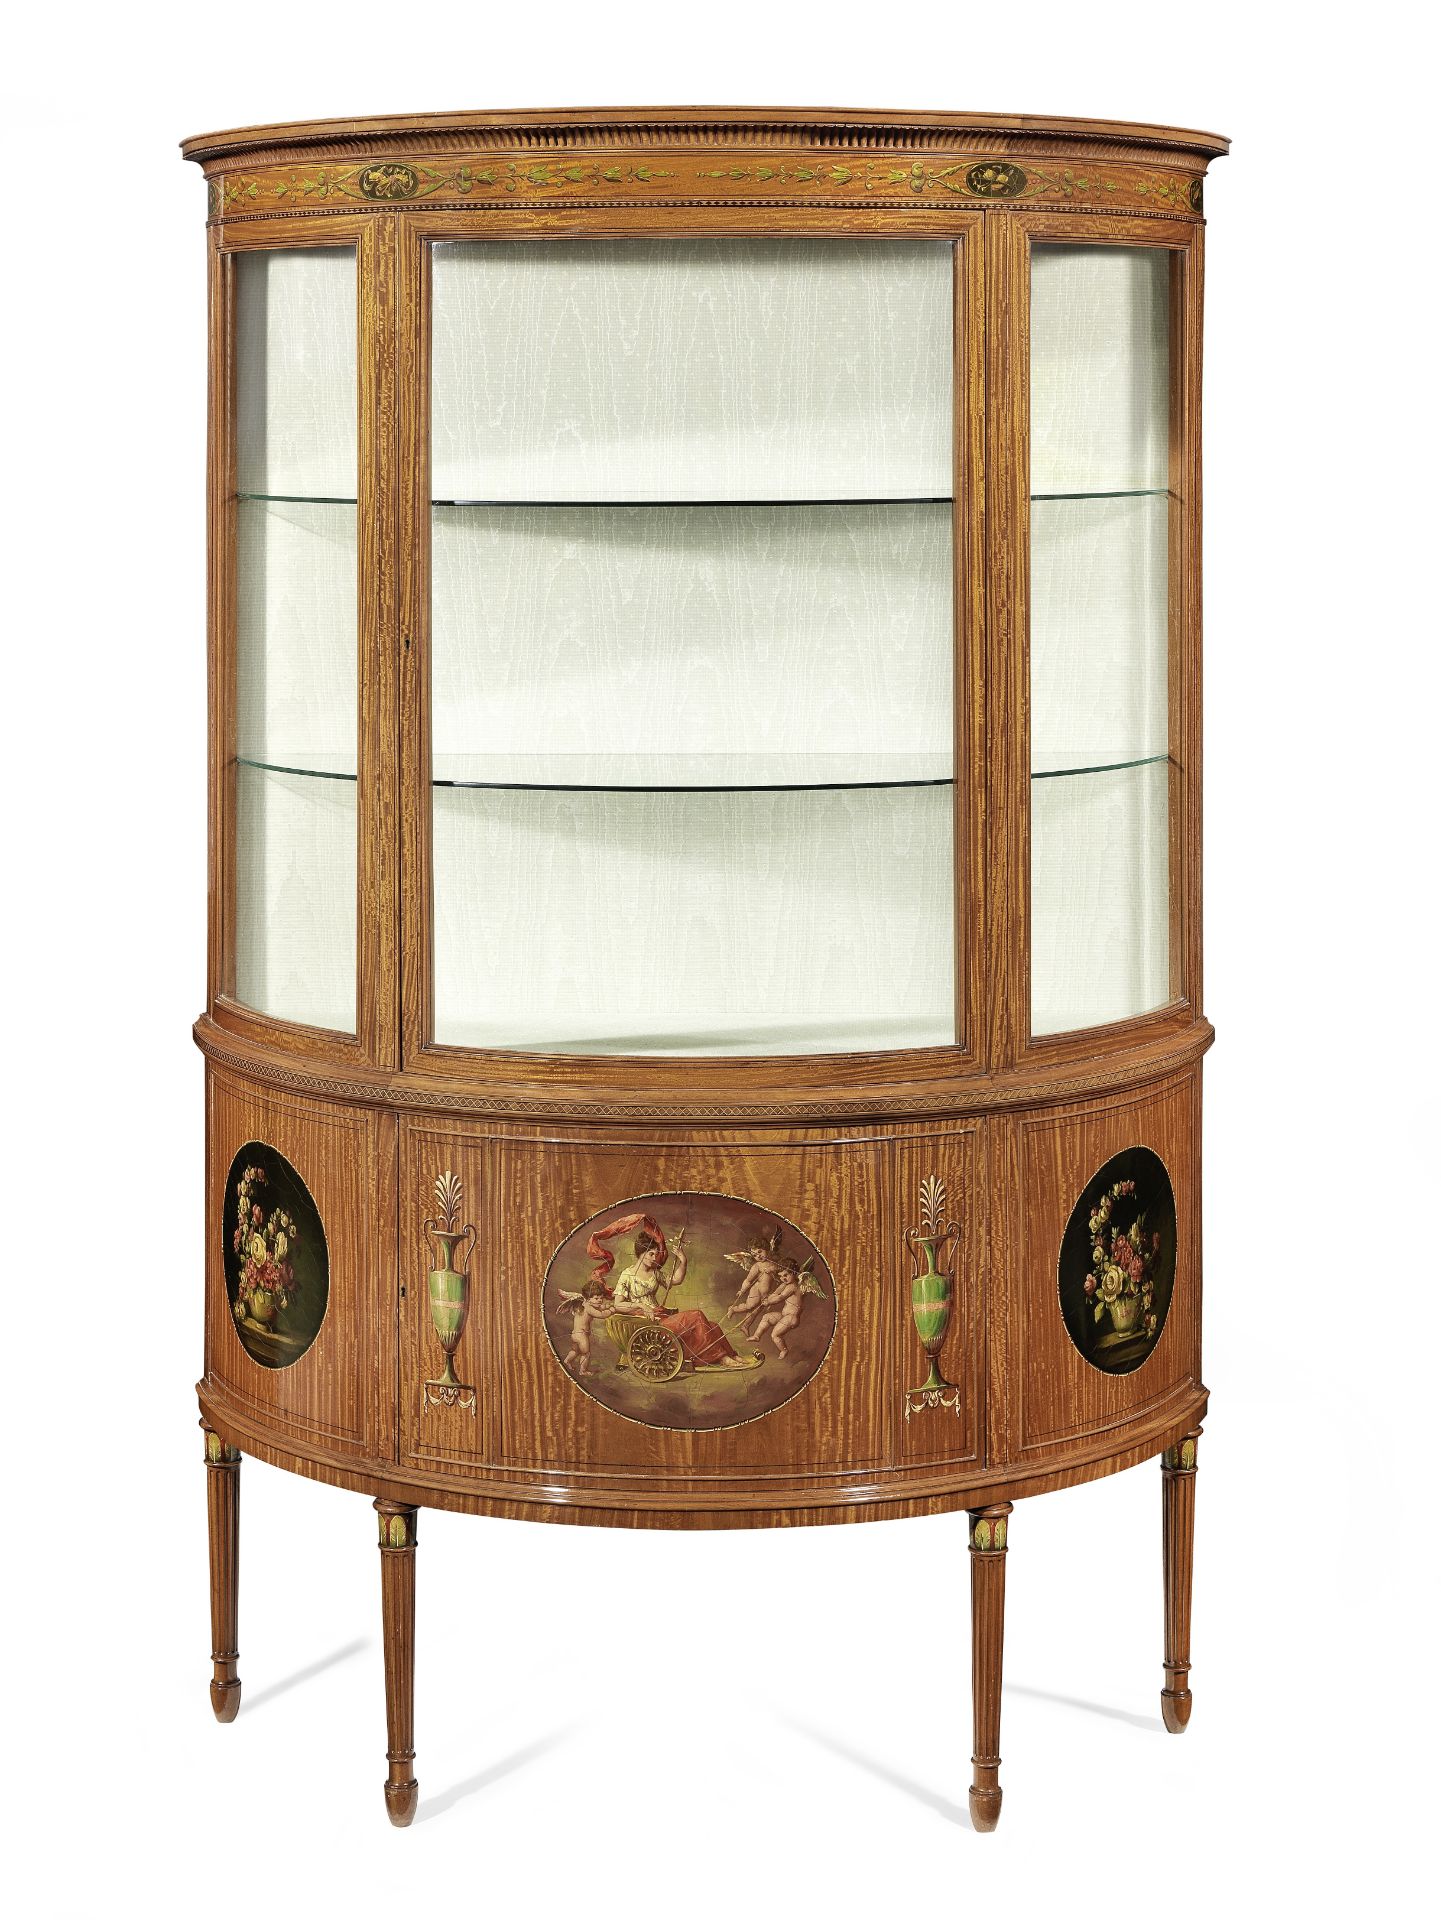 An Edwardian satinwood and polychrome decorated demi-lune display cabinet